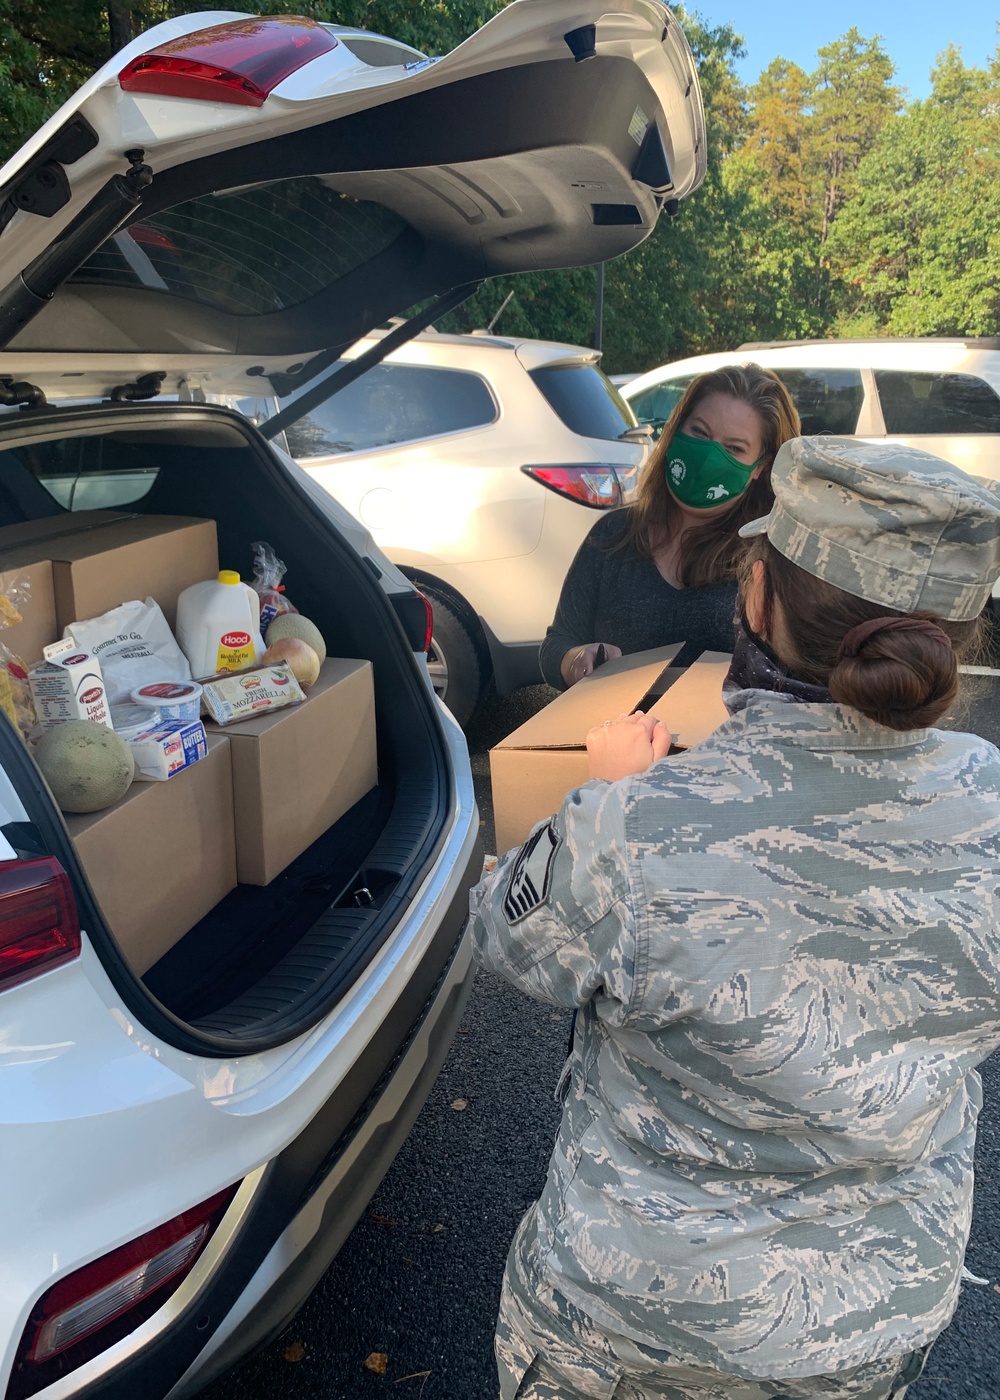 104th Fighter Wing Airman and Family Readiness Program distributes food